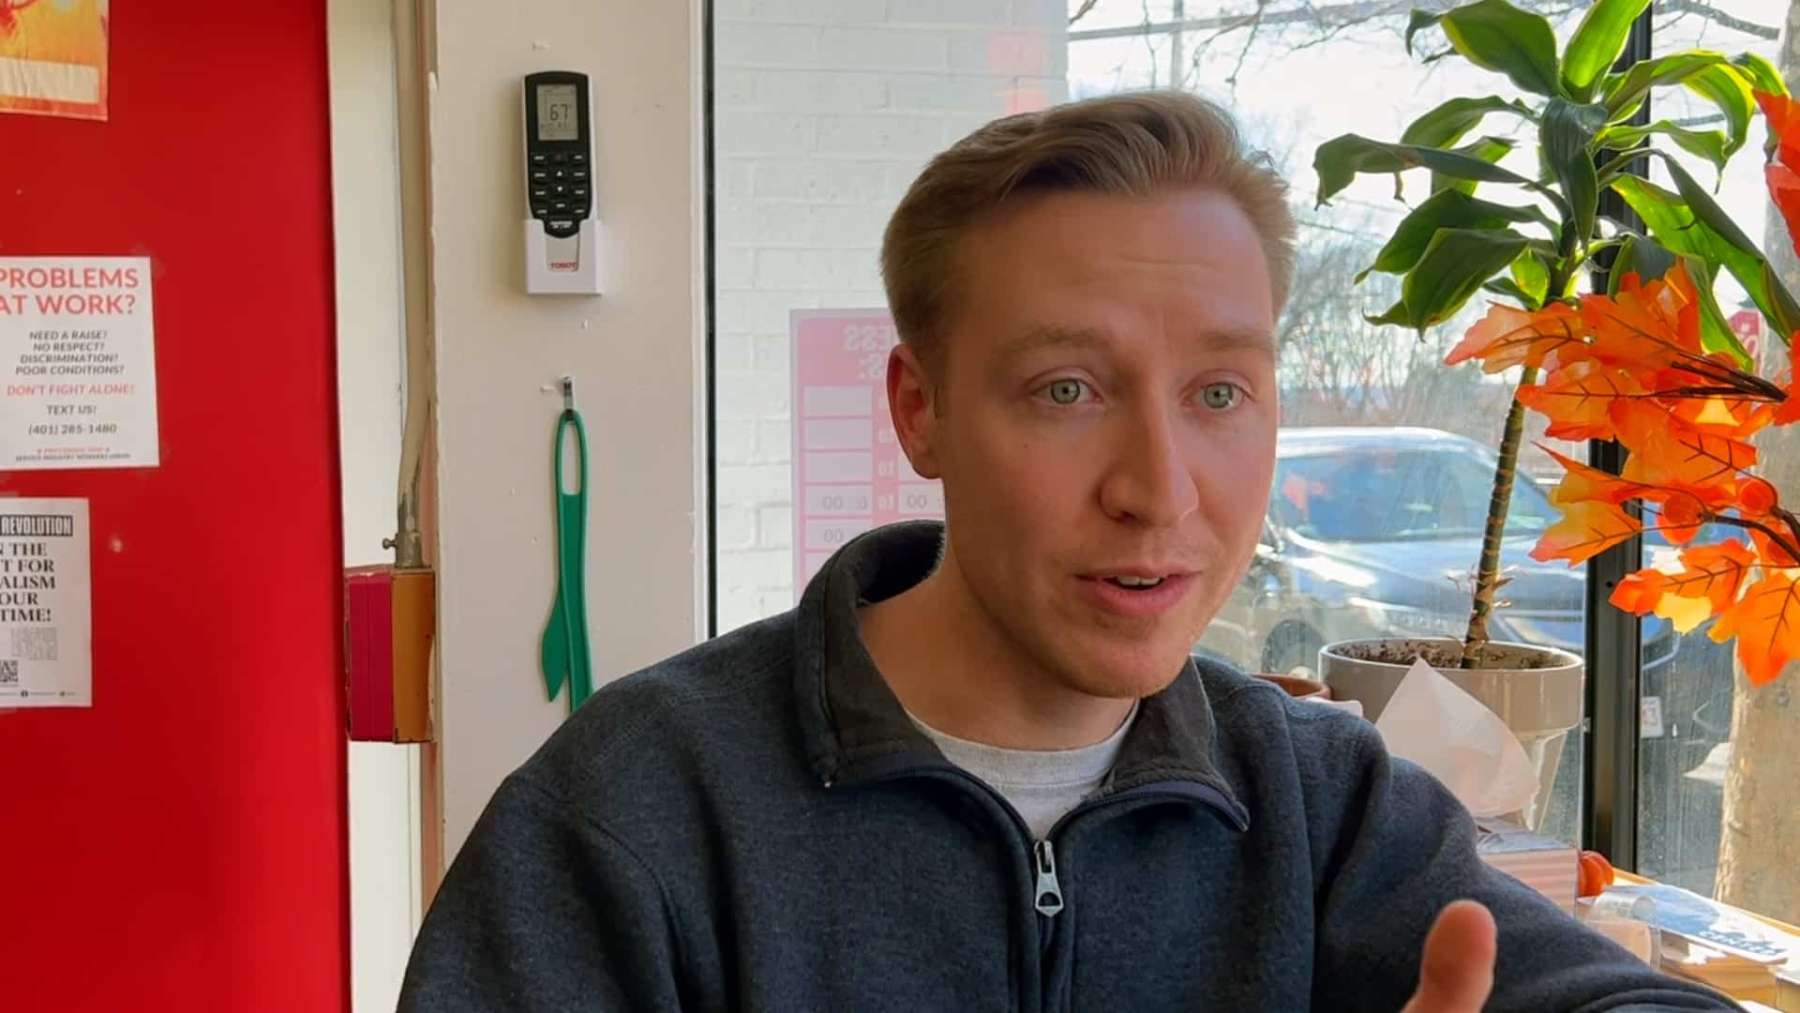 City Council candidate Bradly VanDerStad wants community to drive the agenda in Providence